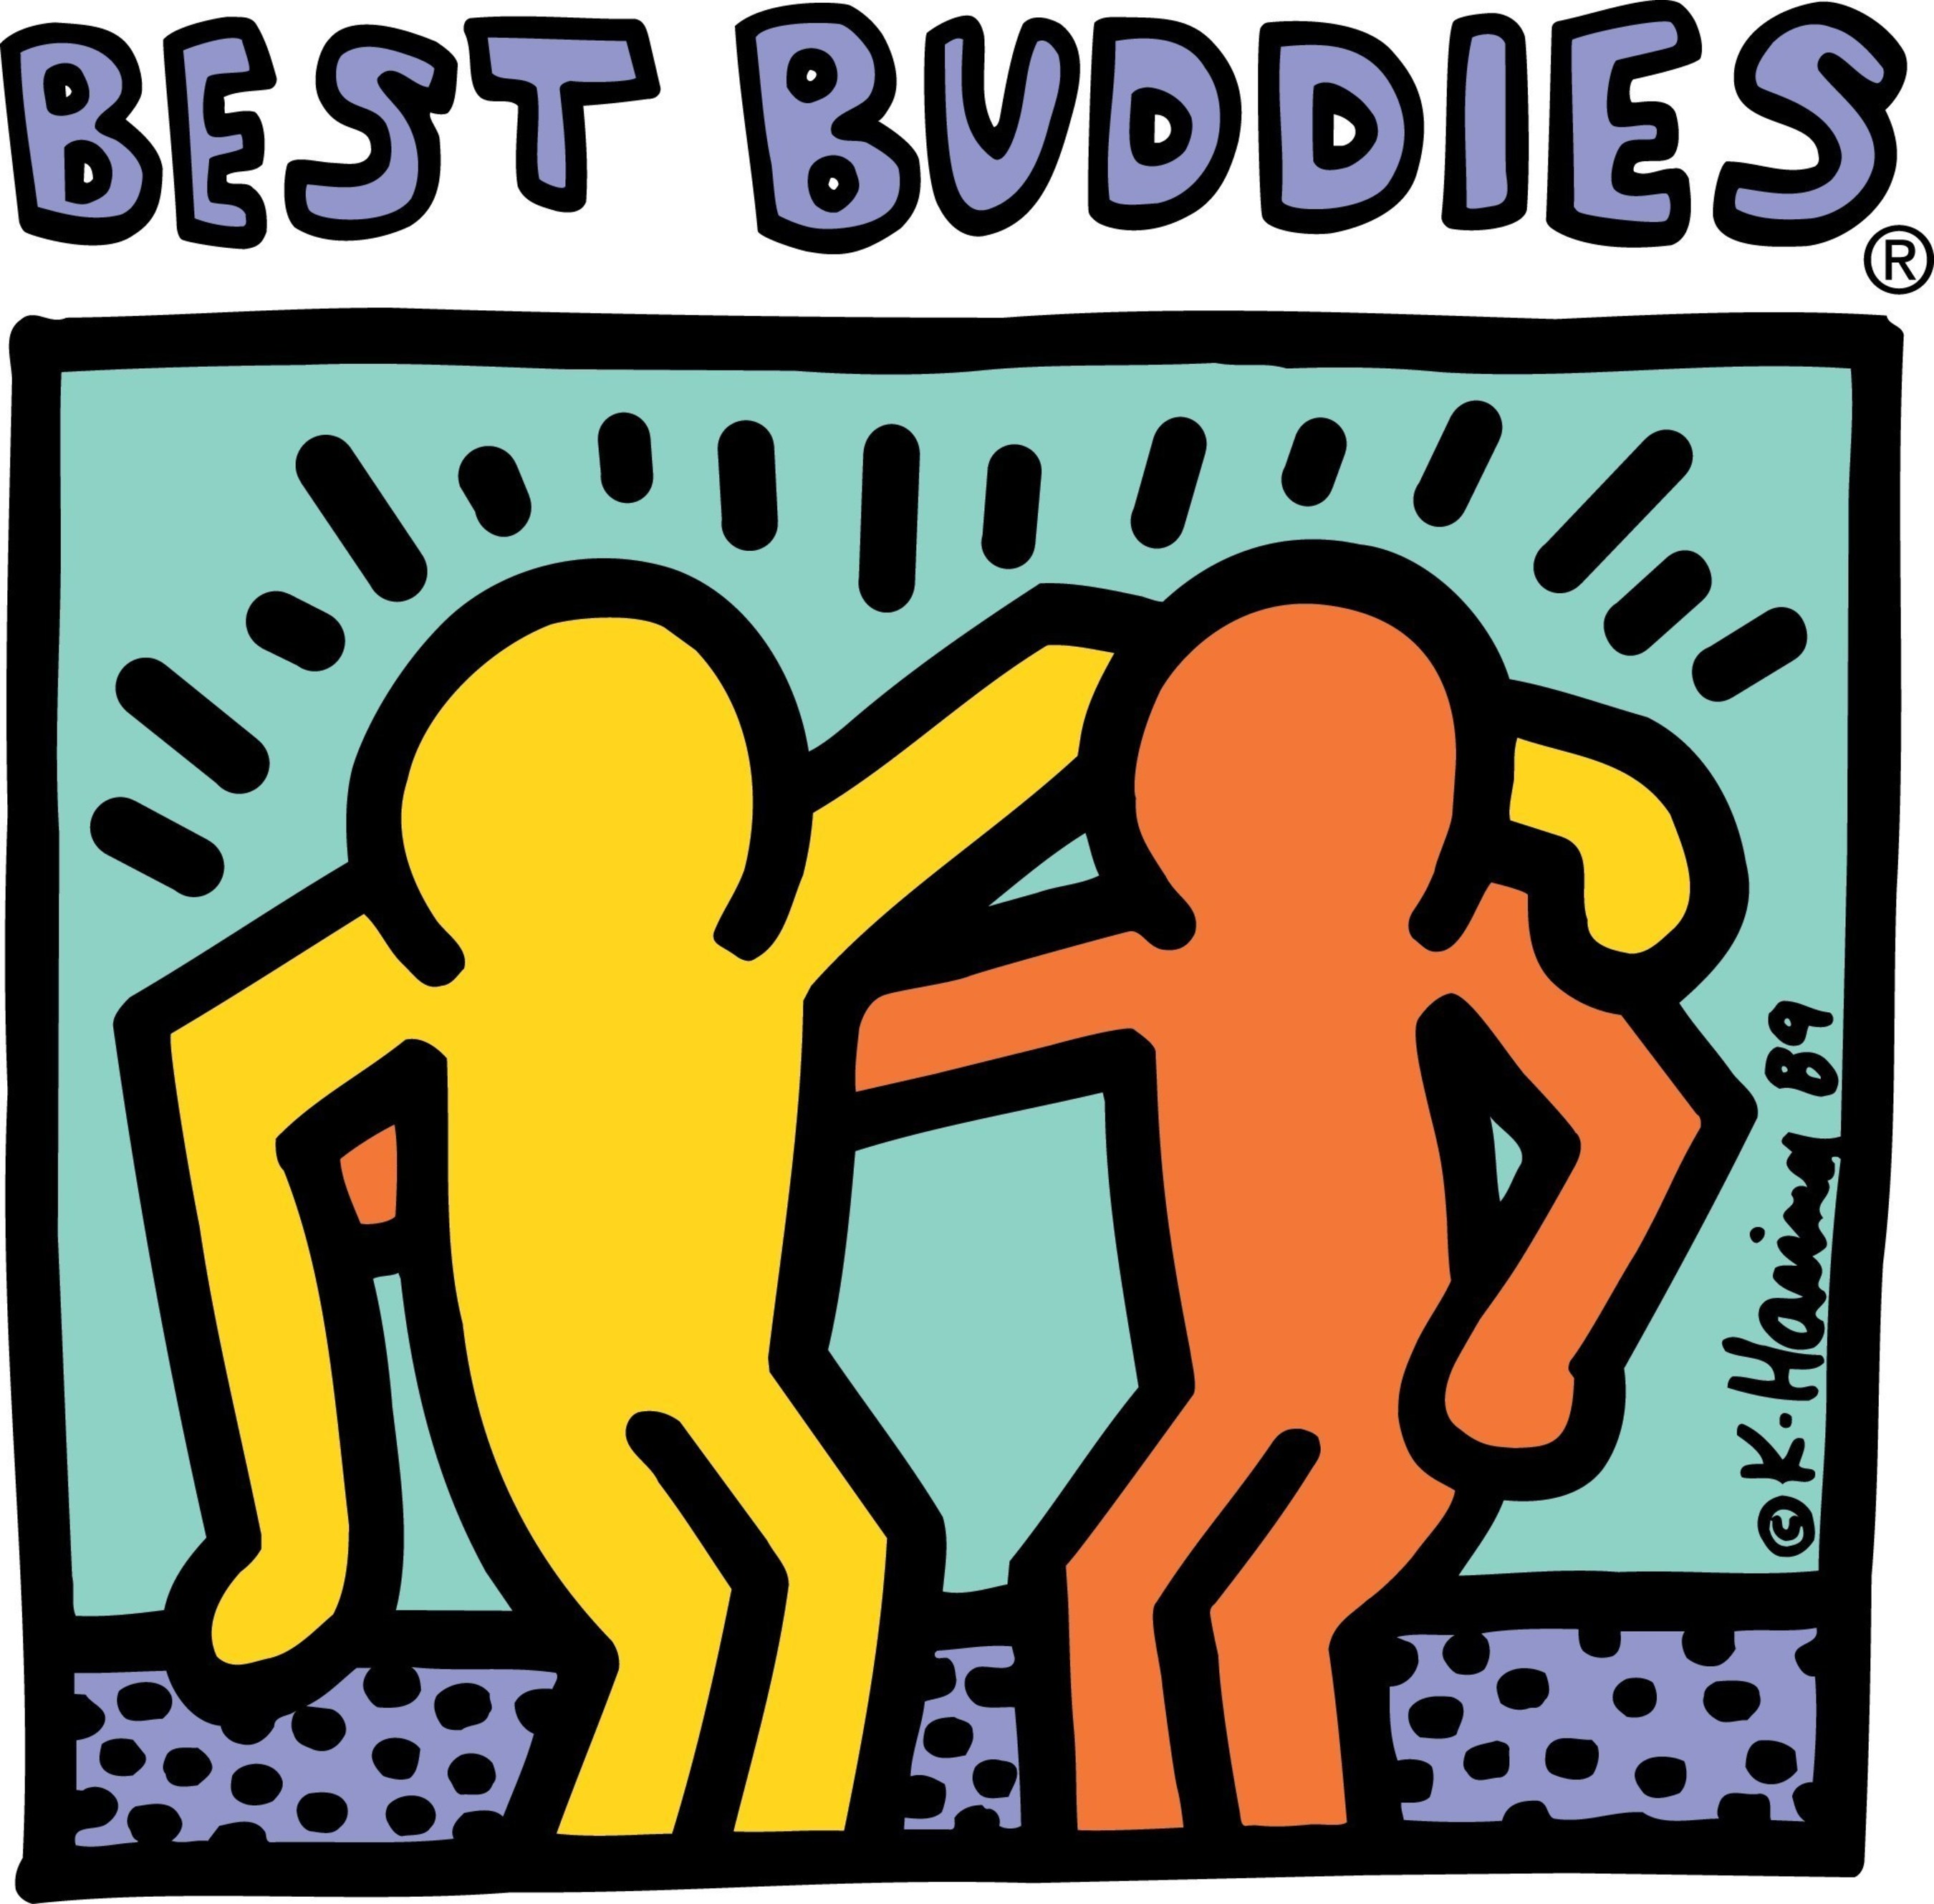 The Best Buddies logo, designed by renowned artist, Keith Haring.